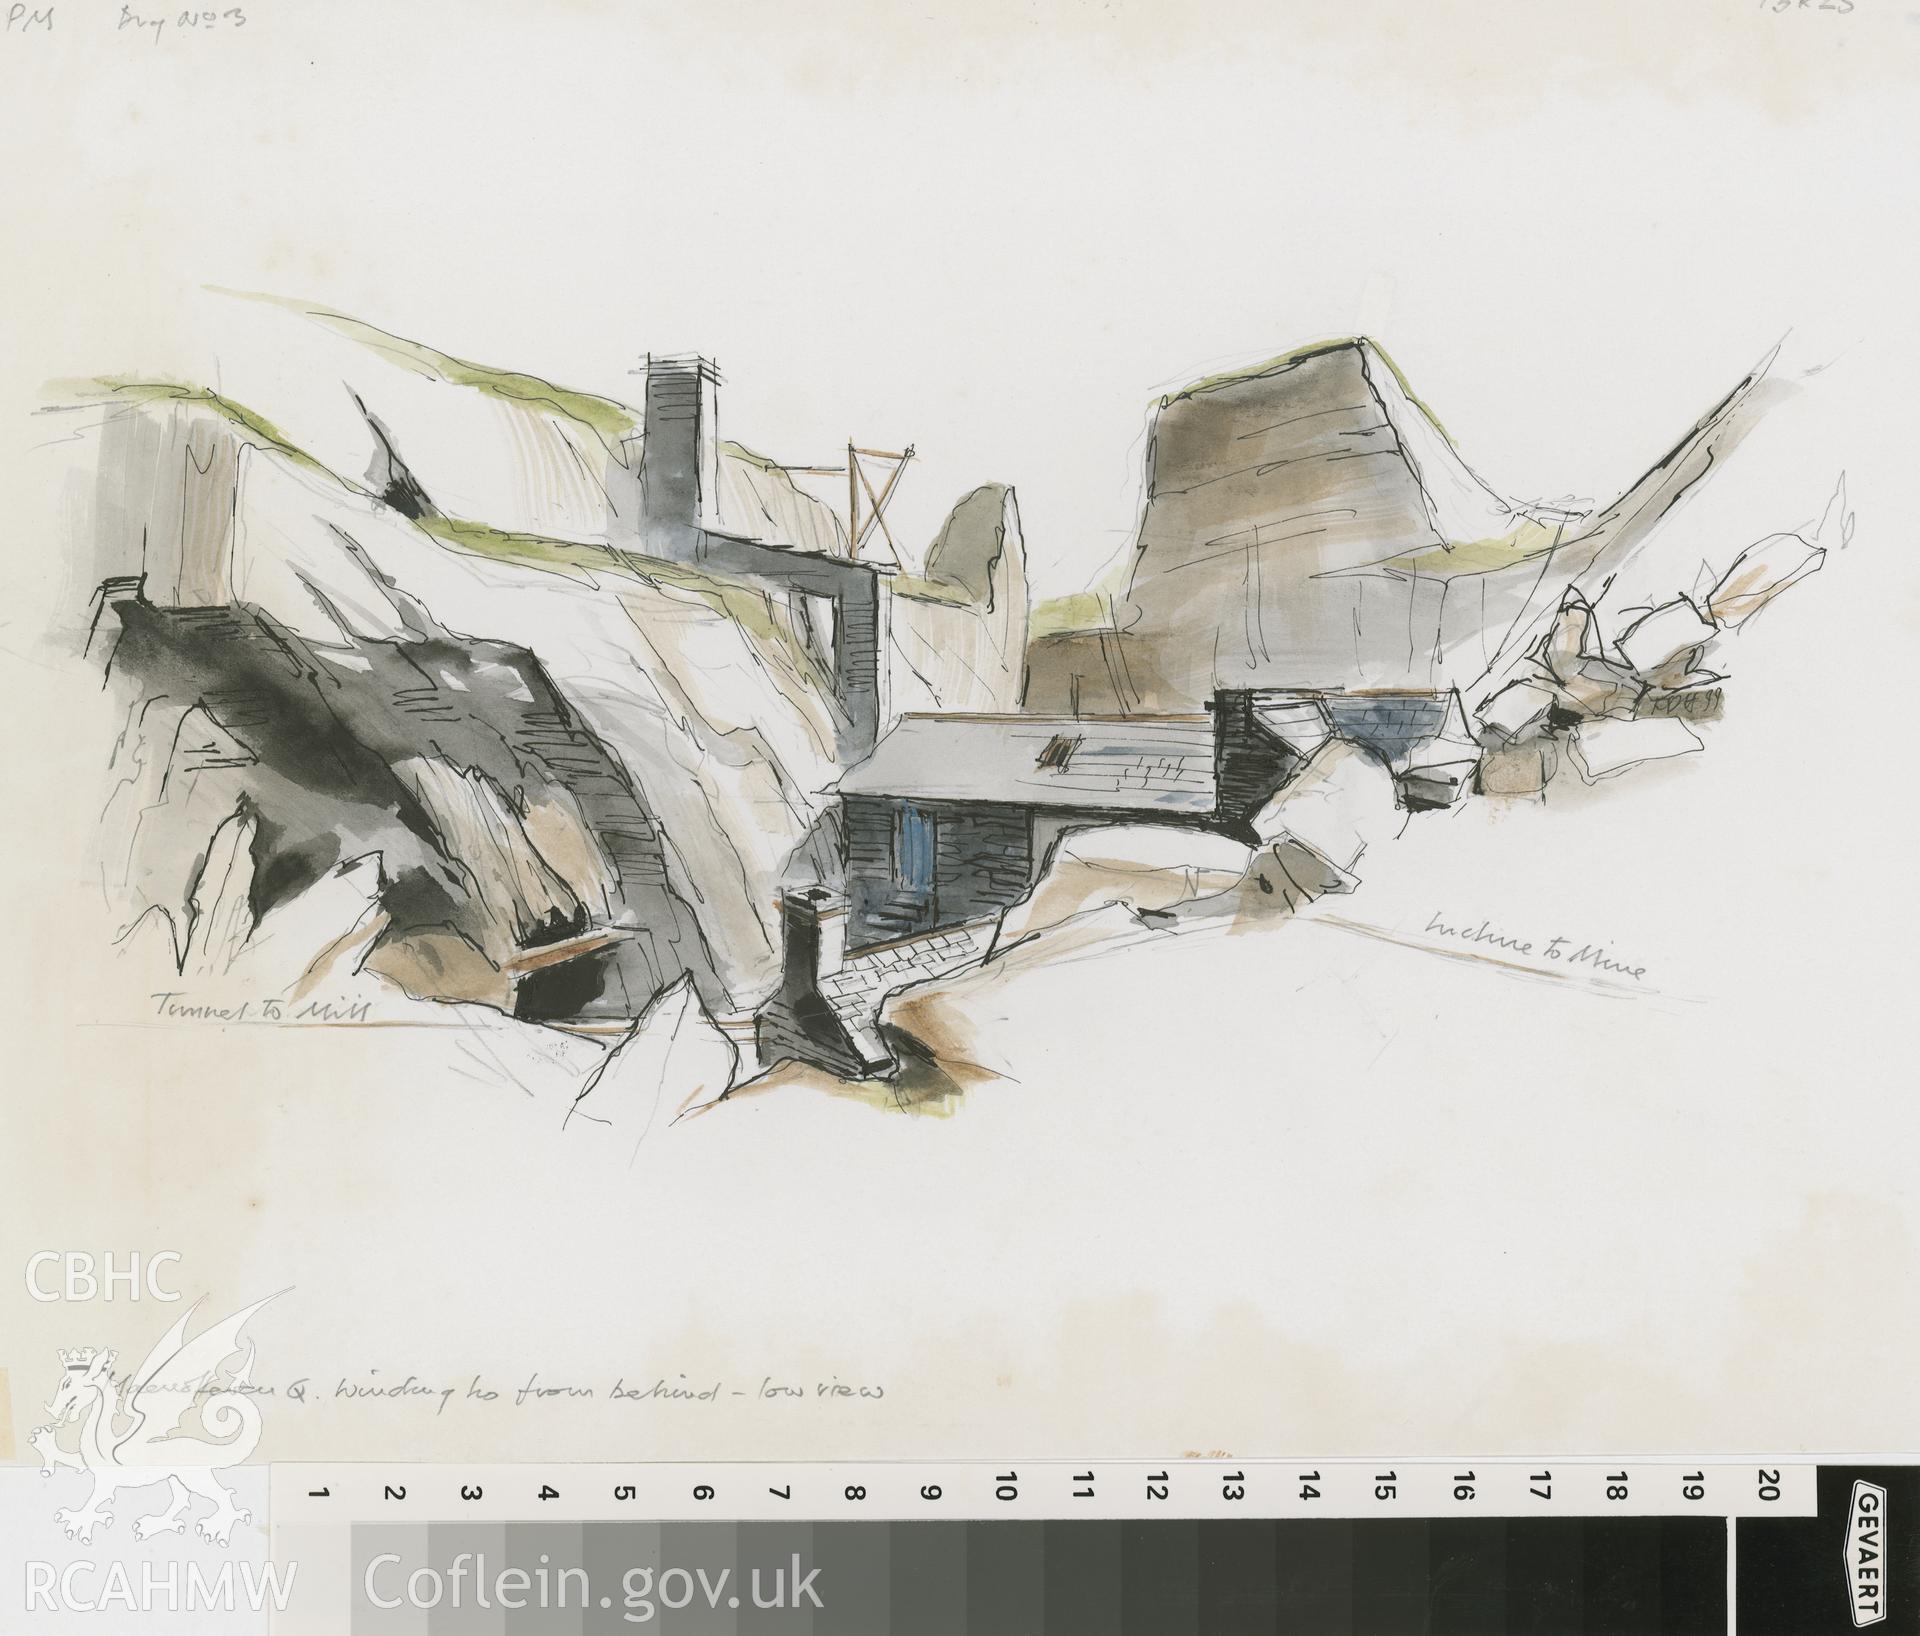 Maenofferen Quarry - Windin. House: (pencil, ink and watercolour) detail drawing, looking across to chimney.